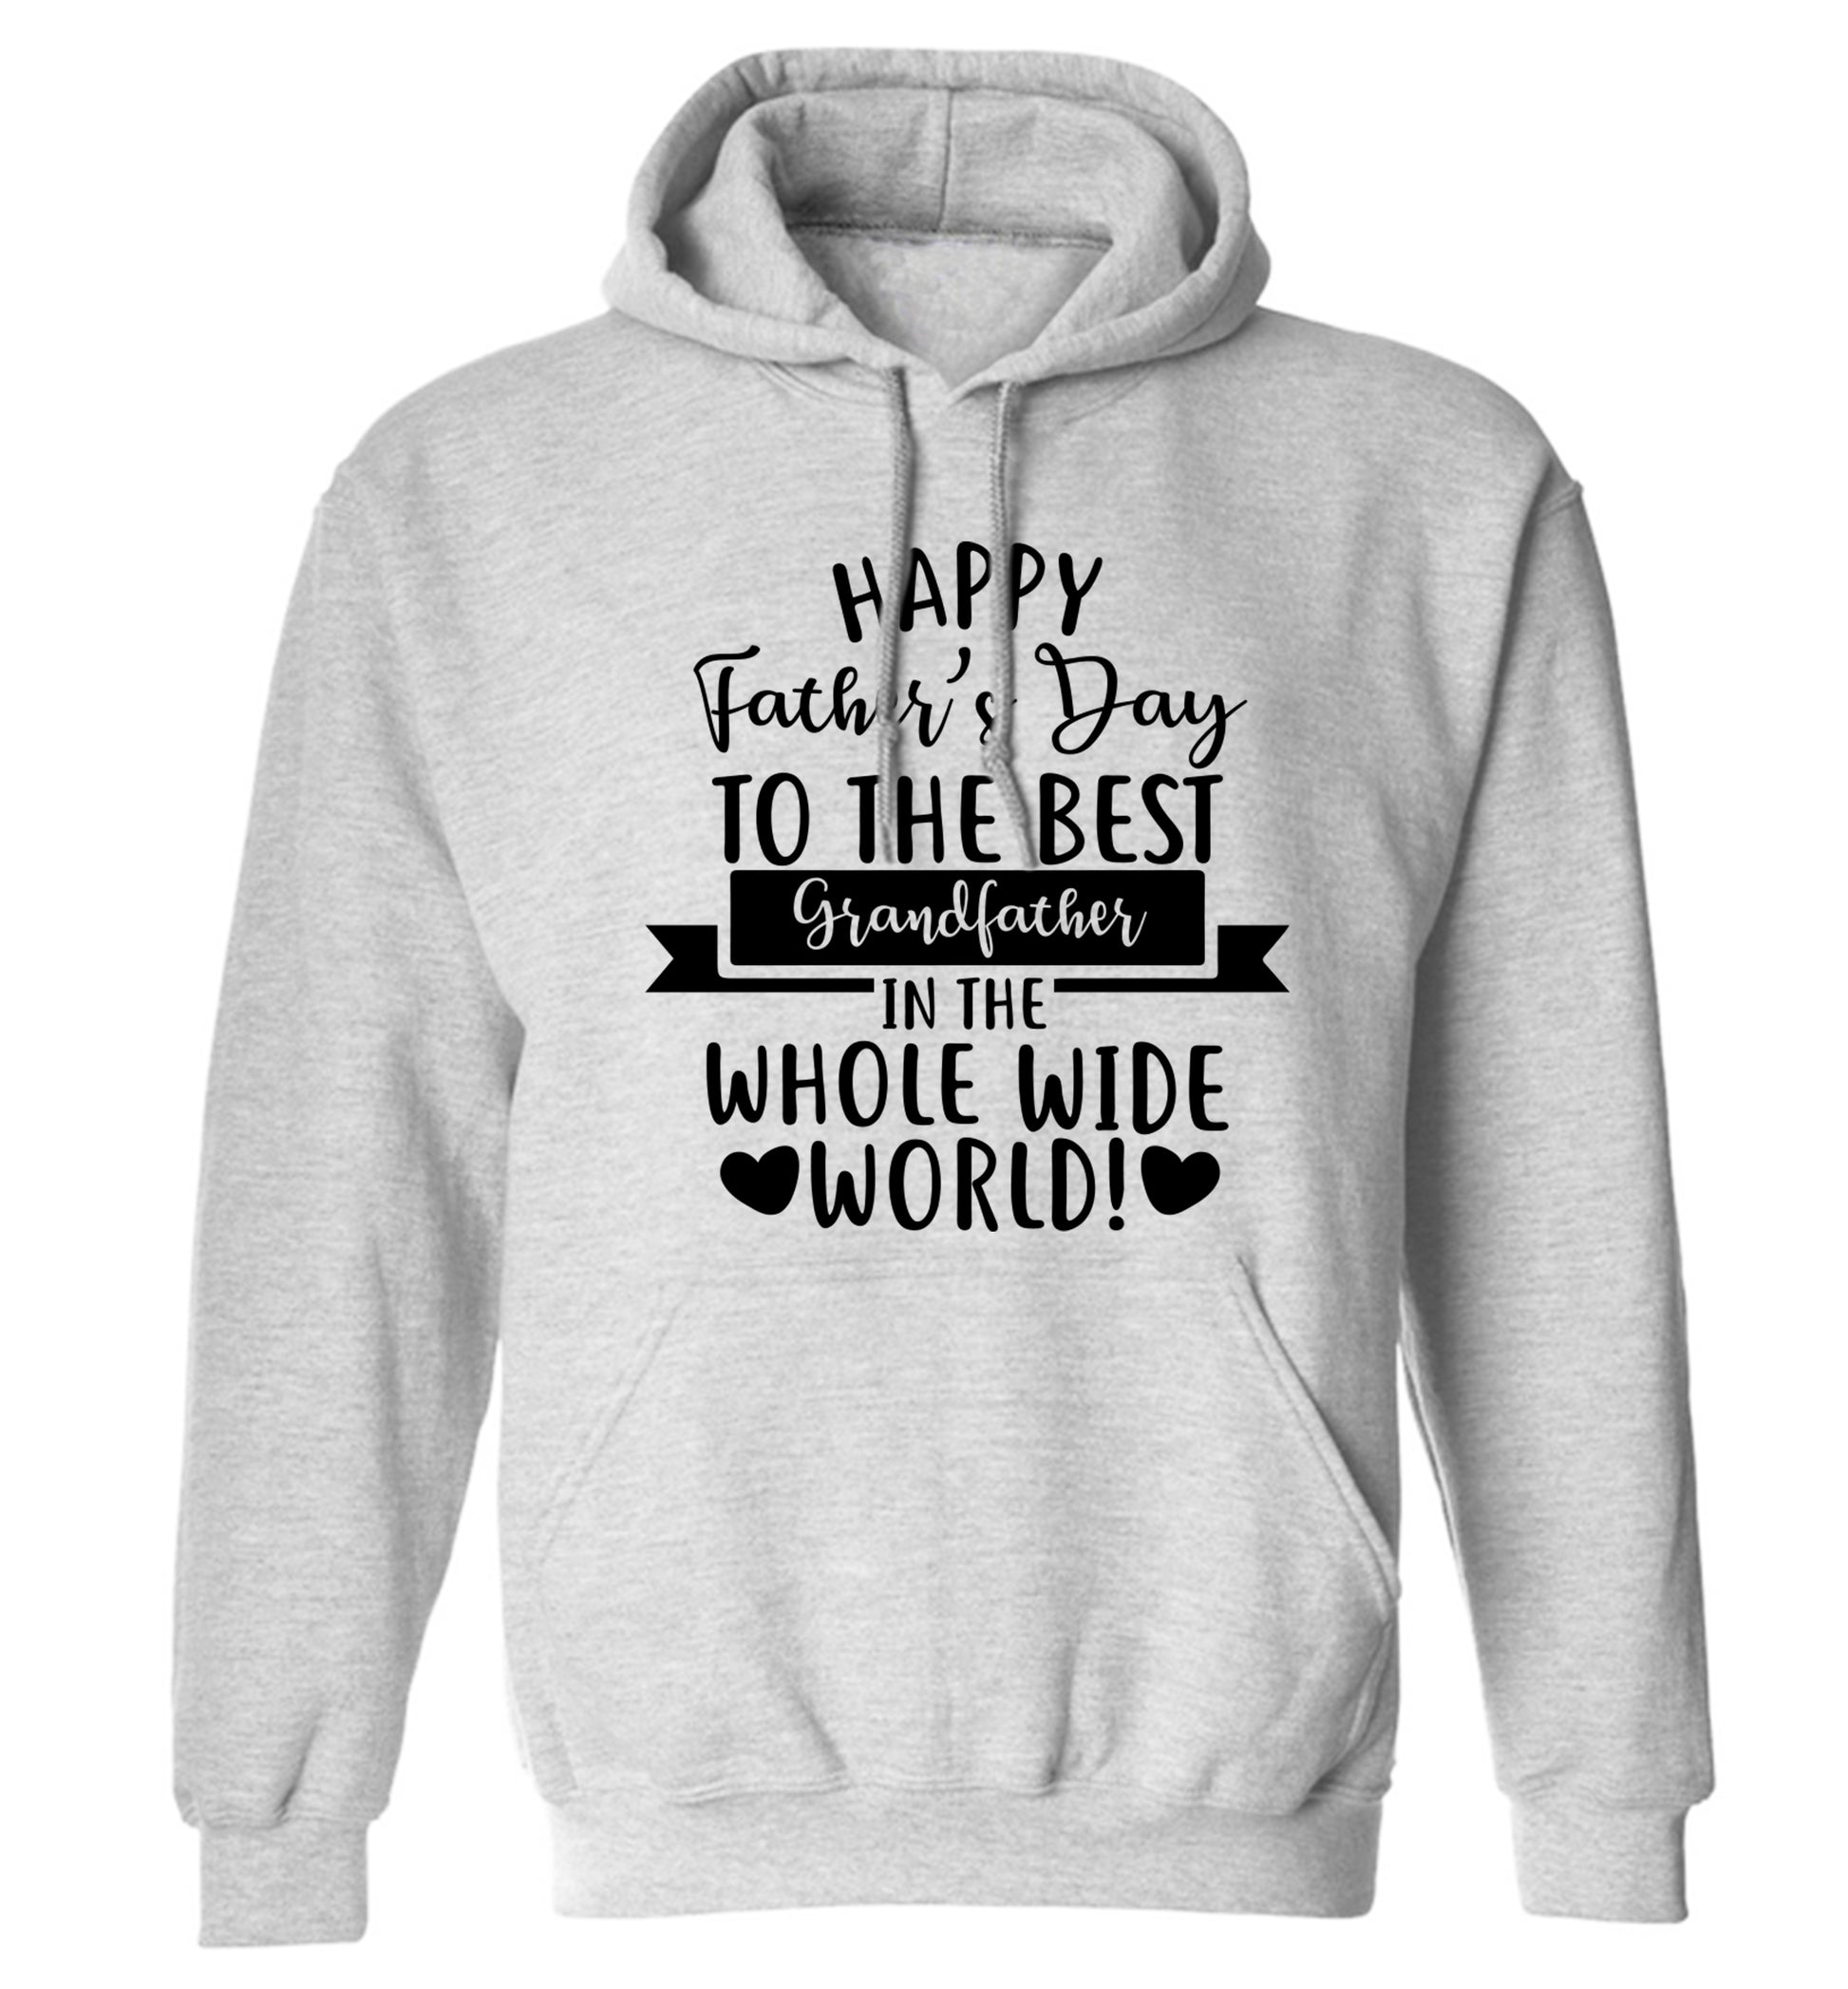 Happy Father's Day to the best grandfather in the world adults unisex grey hoodie 2XL